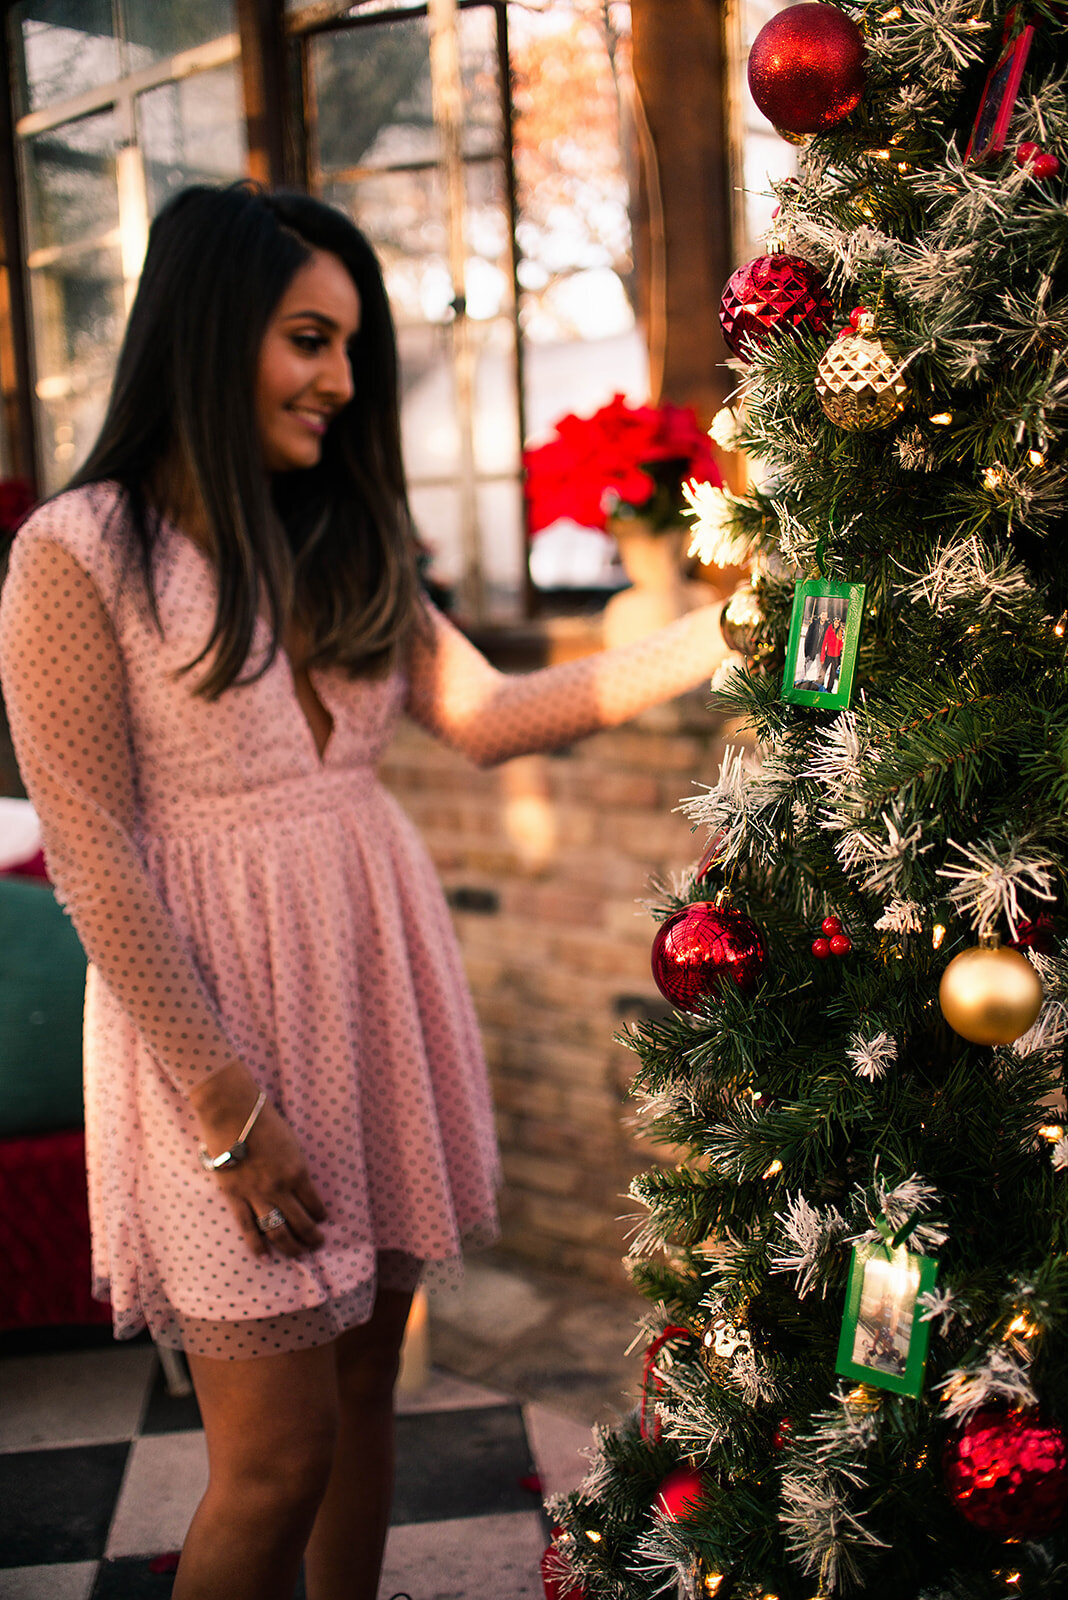 Plan the perfect proposal woman looking at Christmas tree